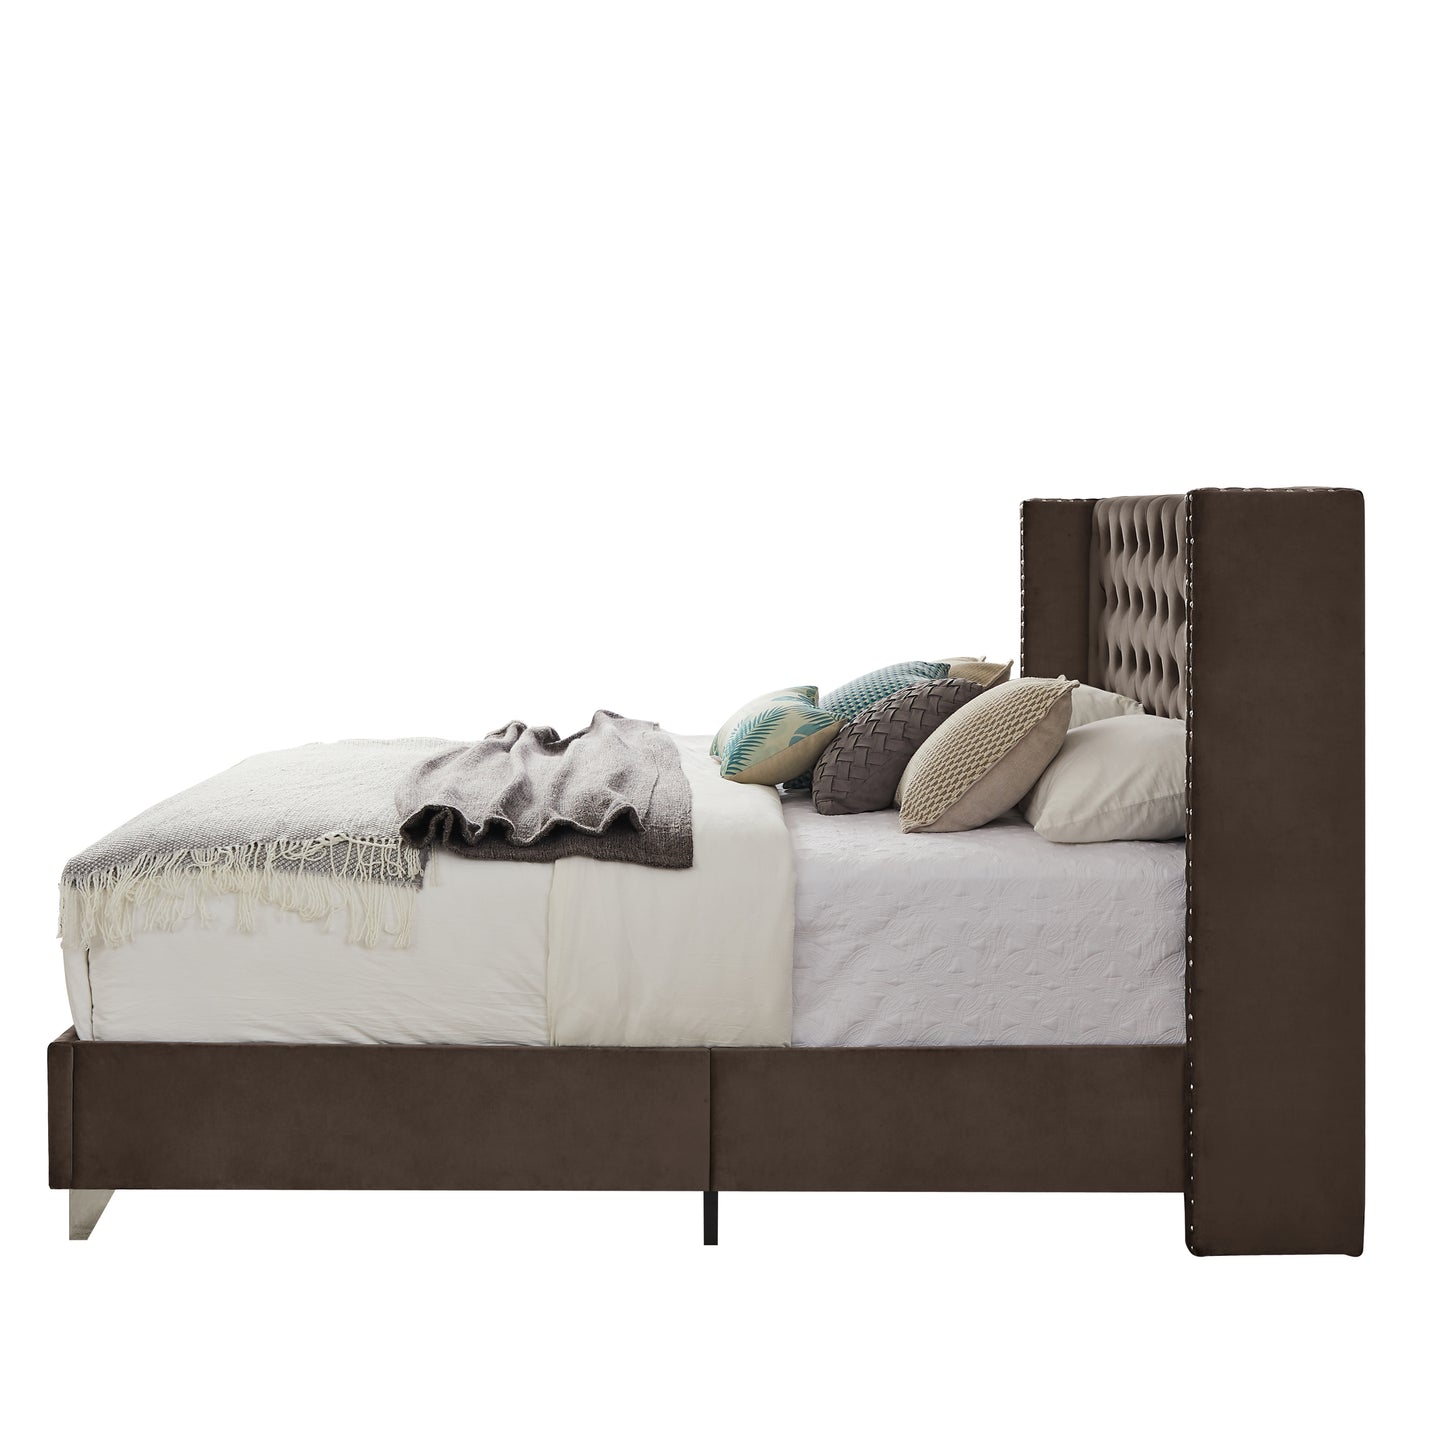 Caine King Bed (brown)